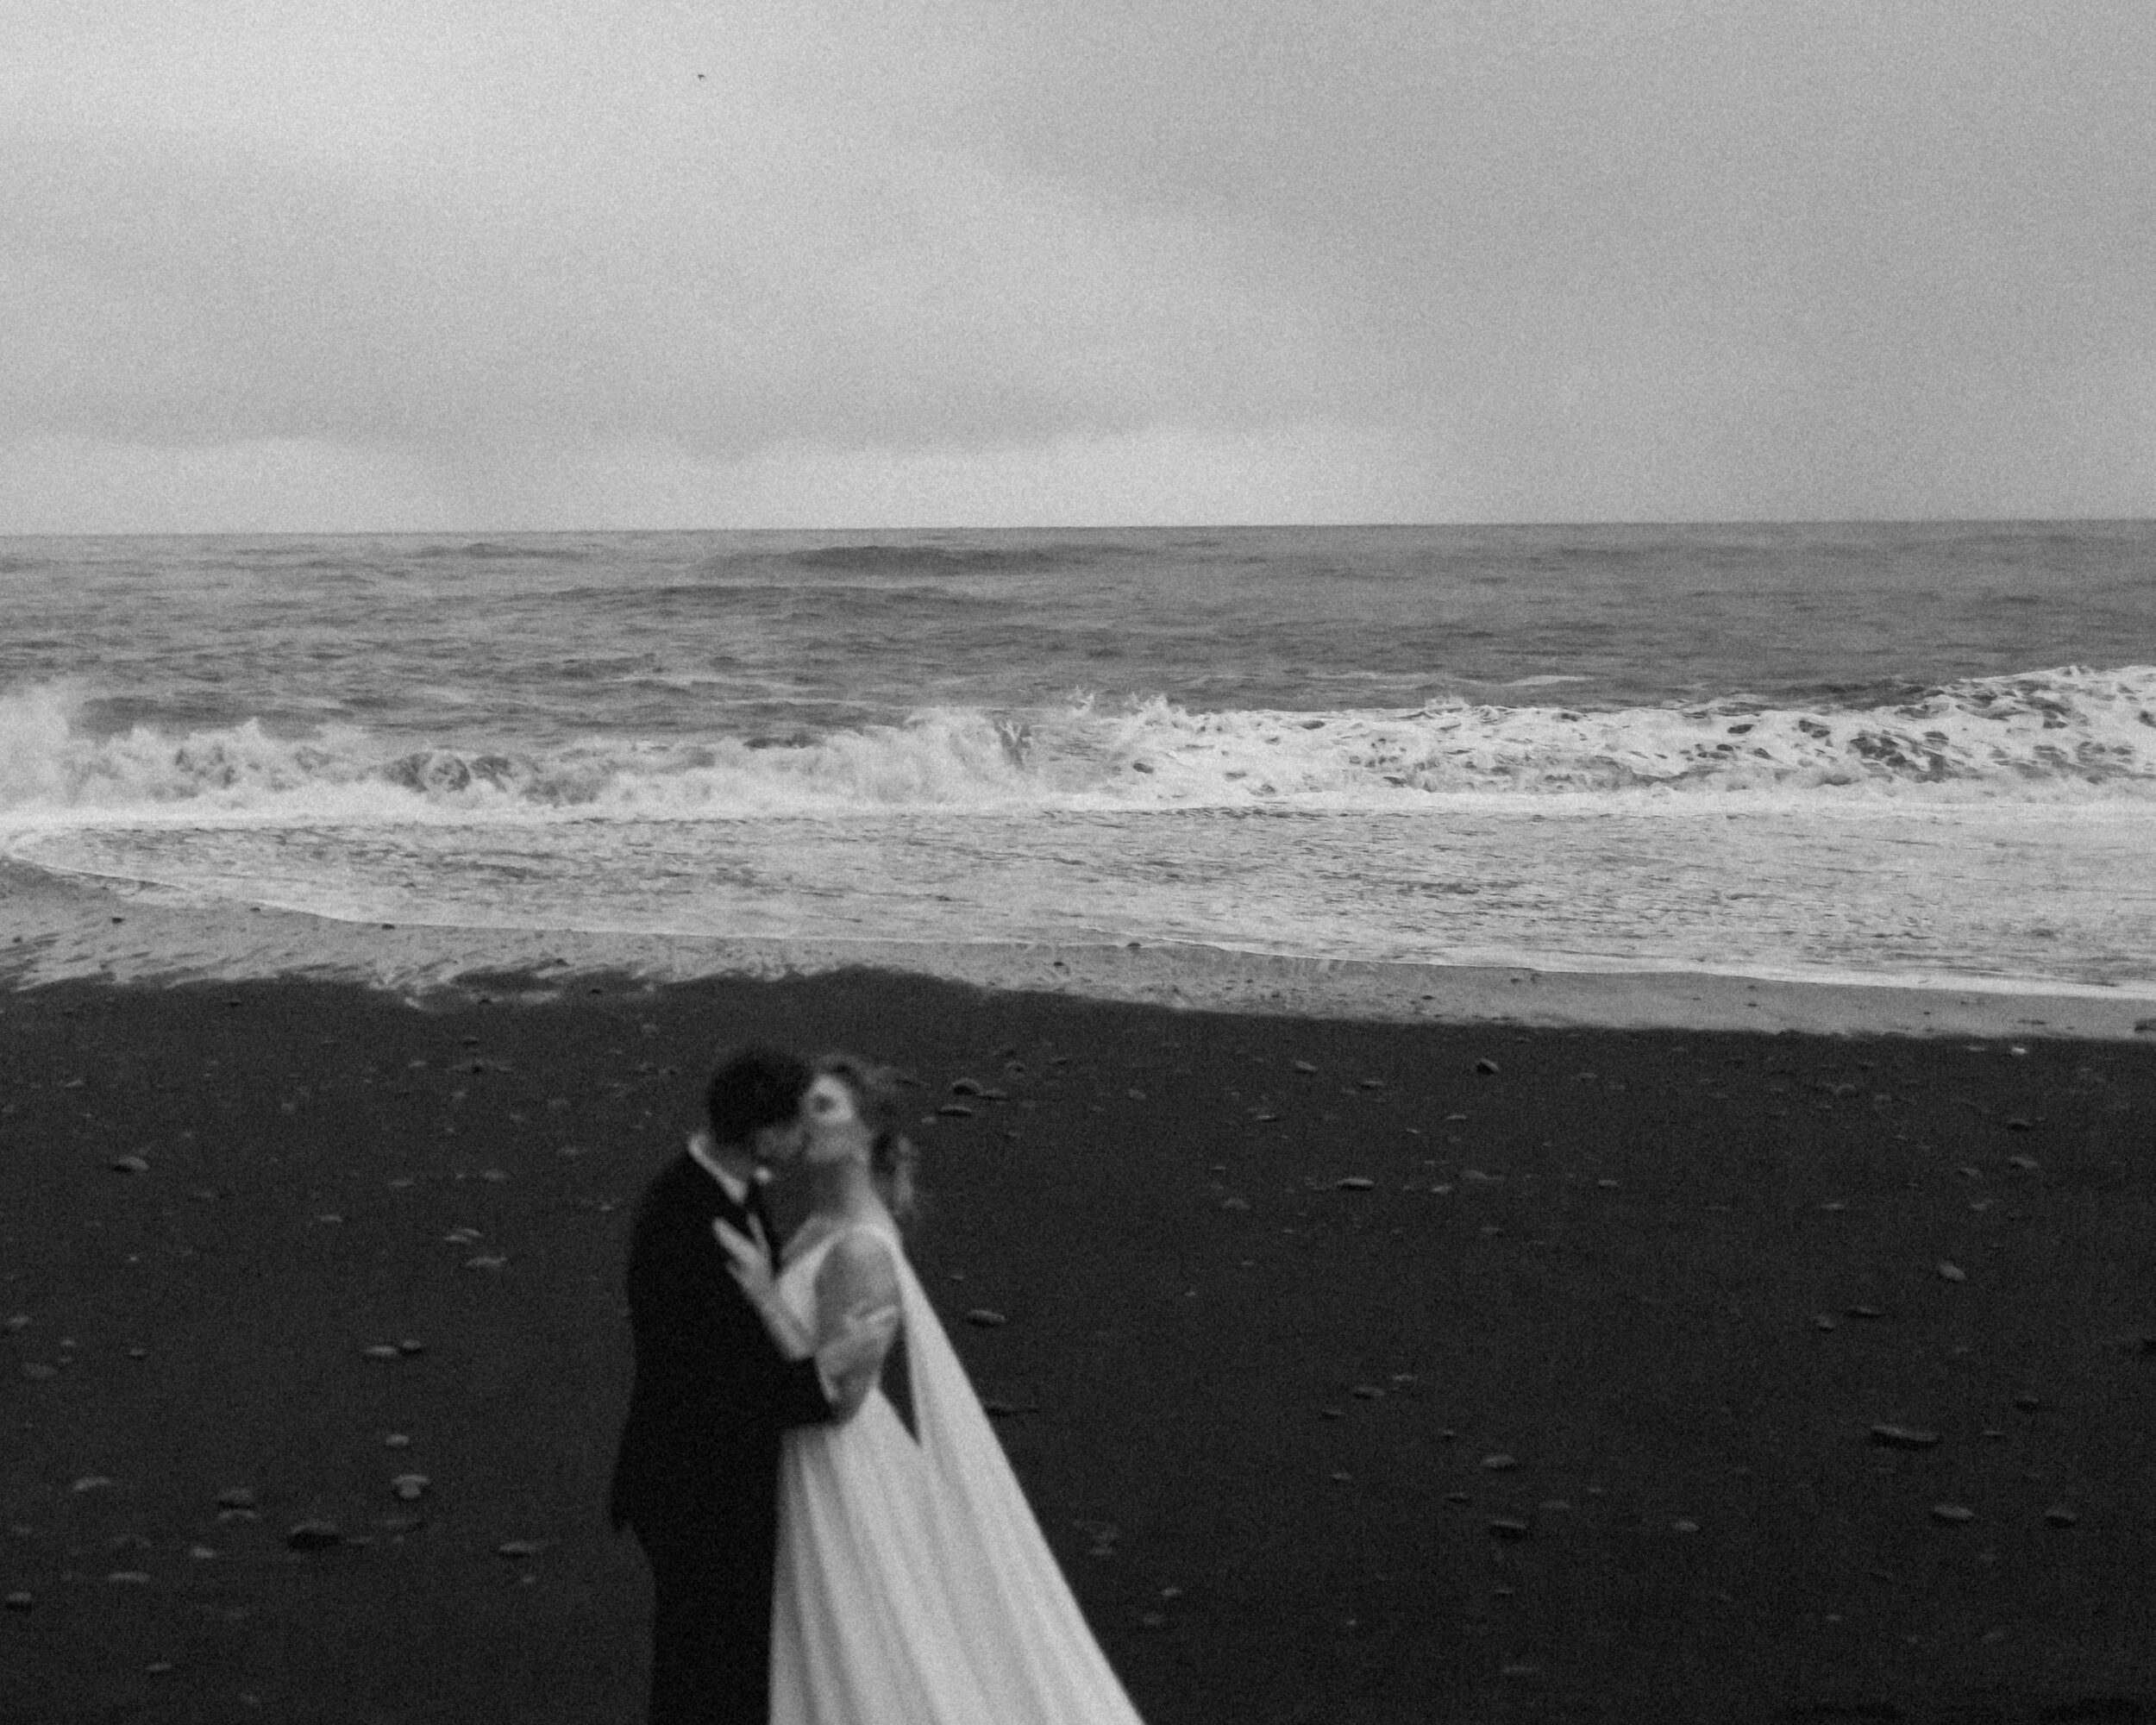 A couple embraces while on the shores of a black sand beach in Southern Iceland